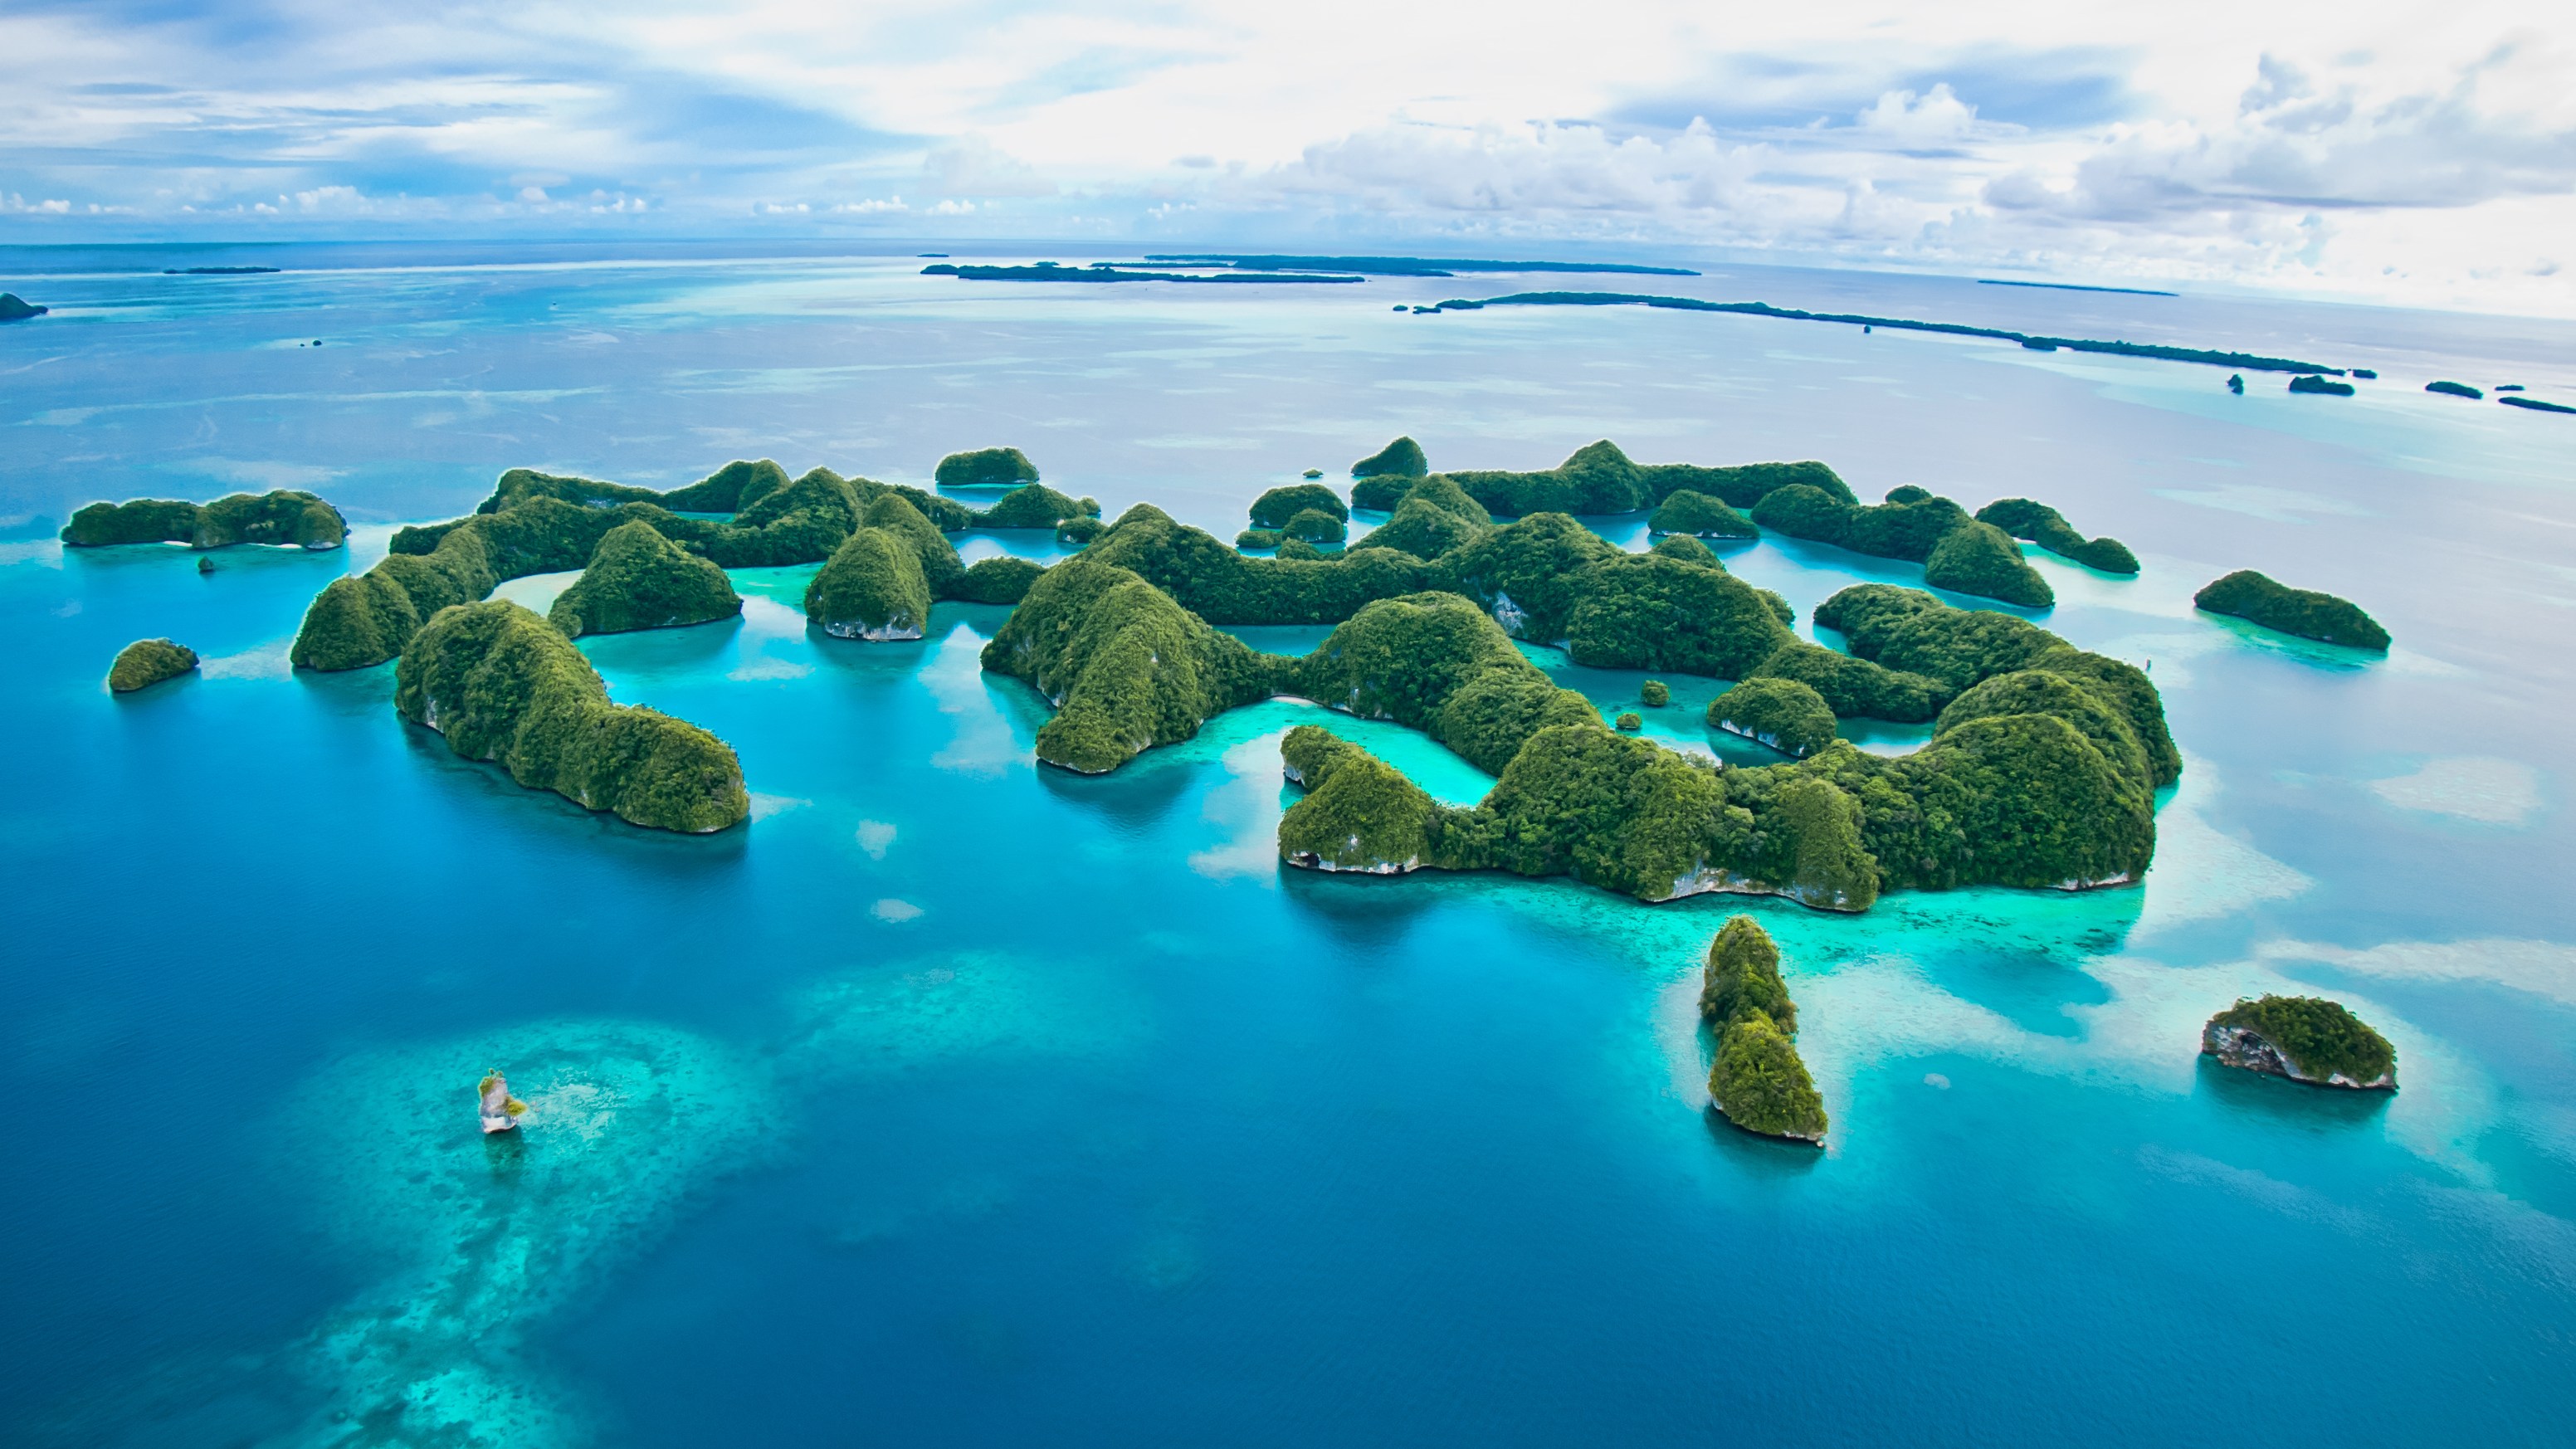 Palau has a population of just 20,000 but is in a strategically important area